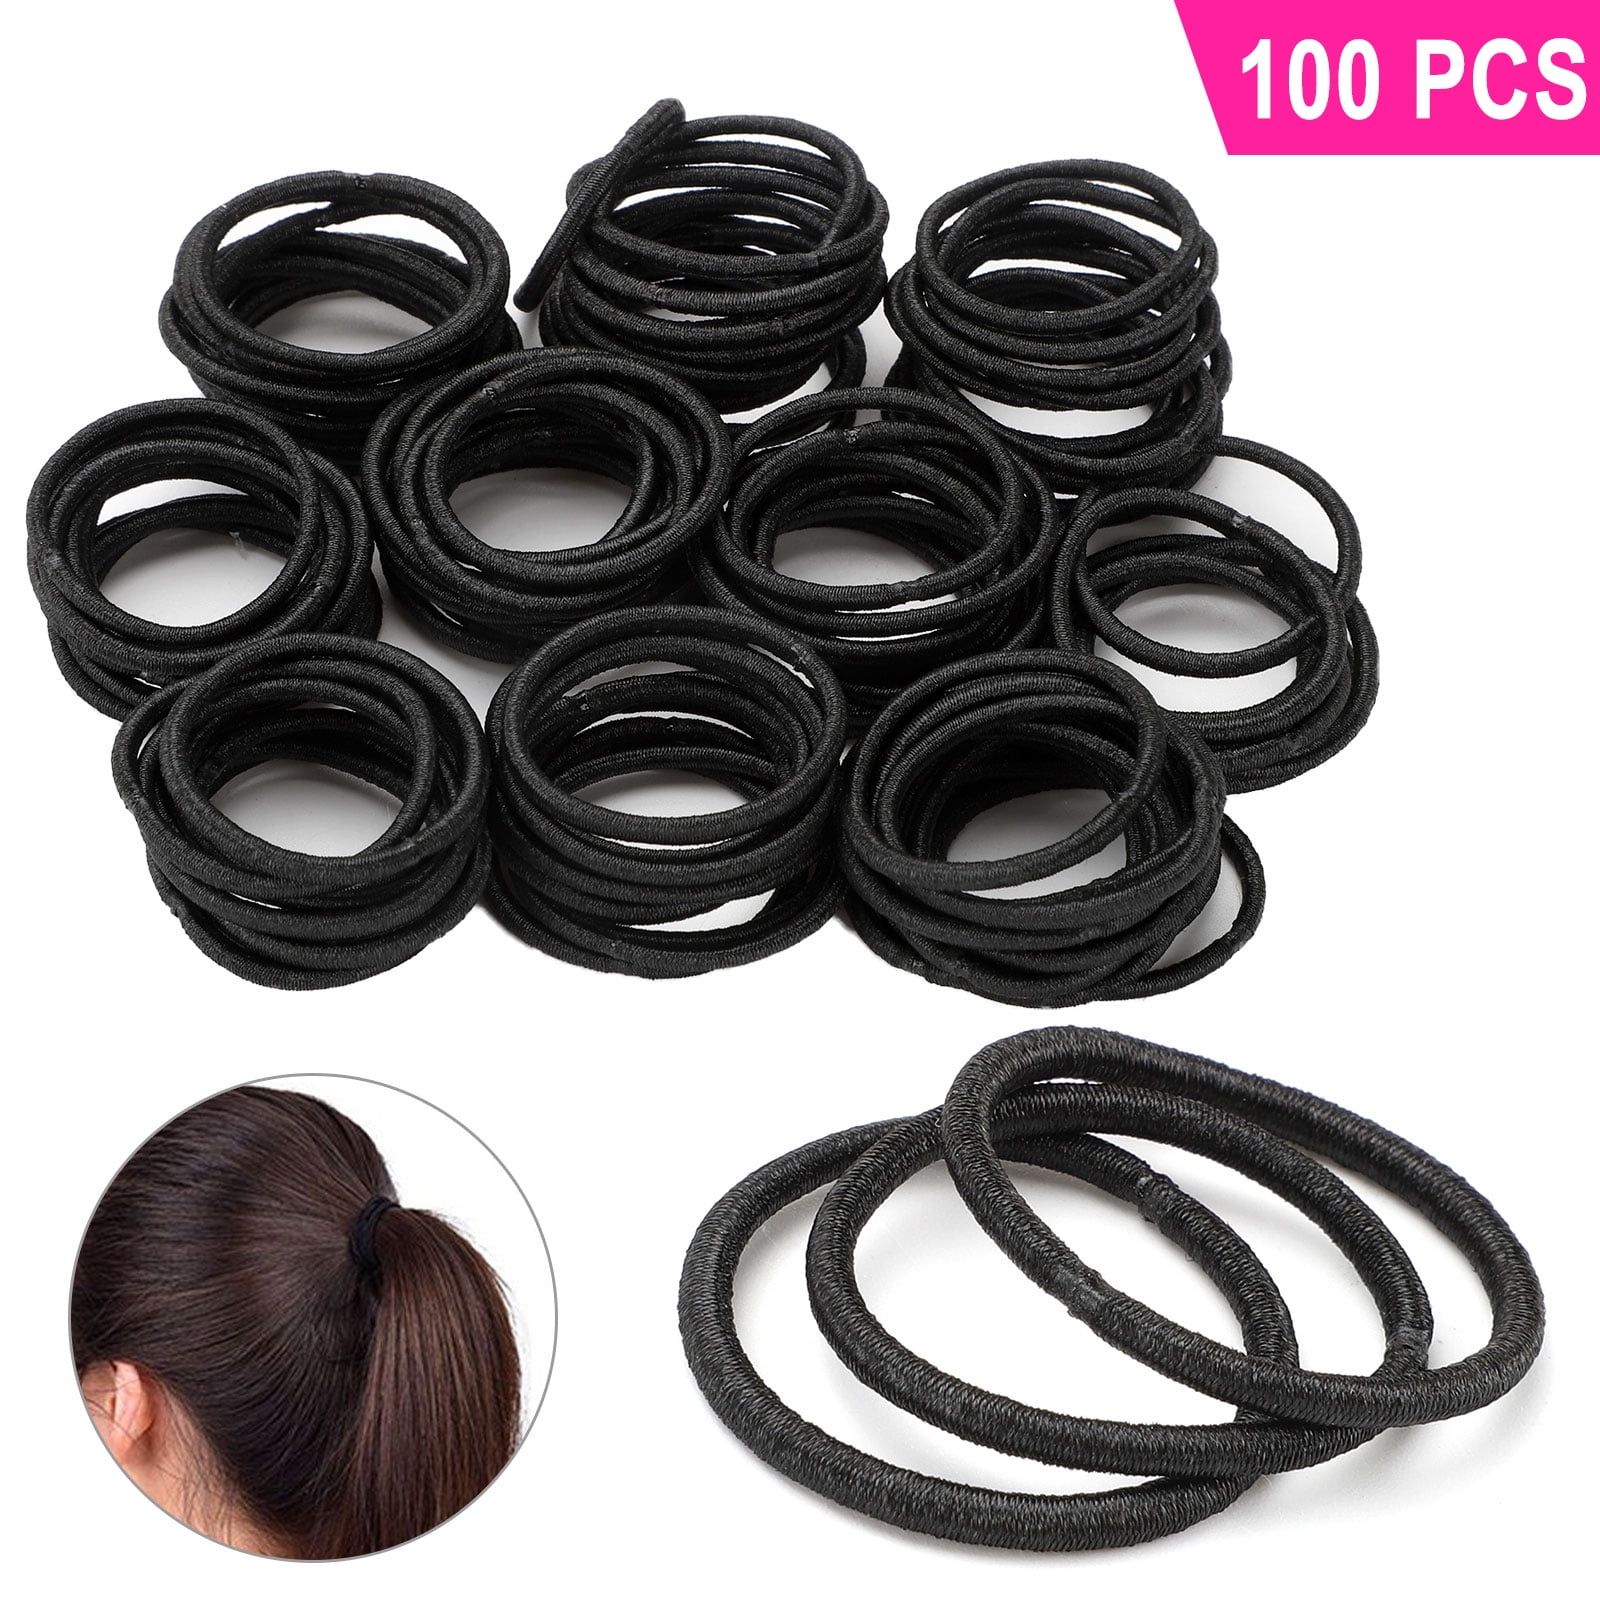 1,200 Pack Of Mini Rubber Elastic Hair Bands For Just $1.39 From